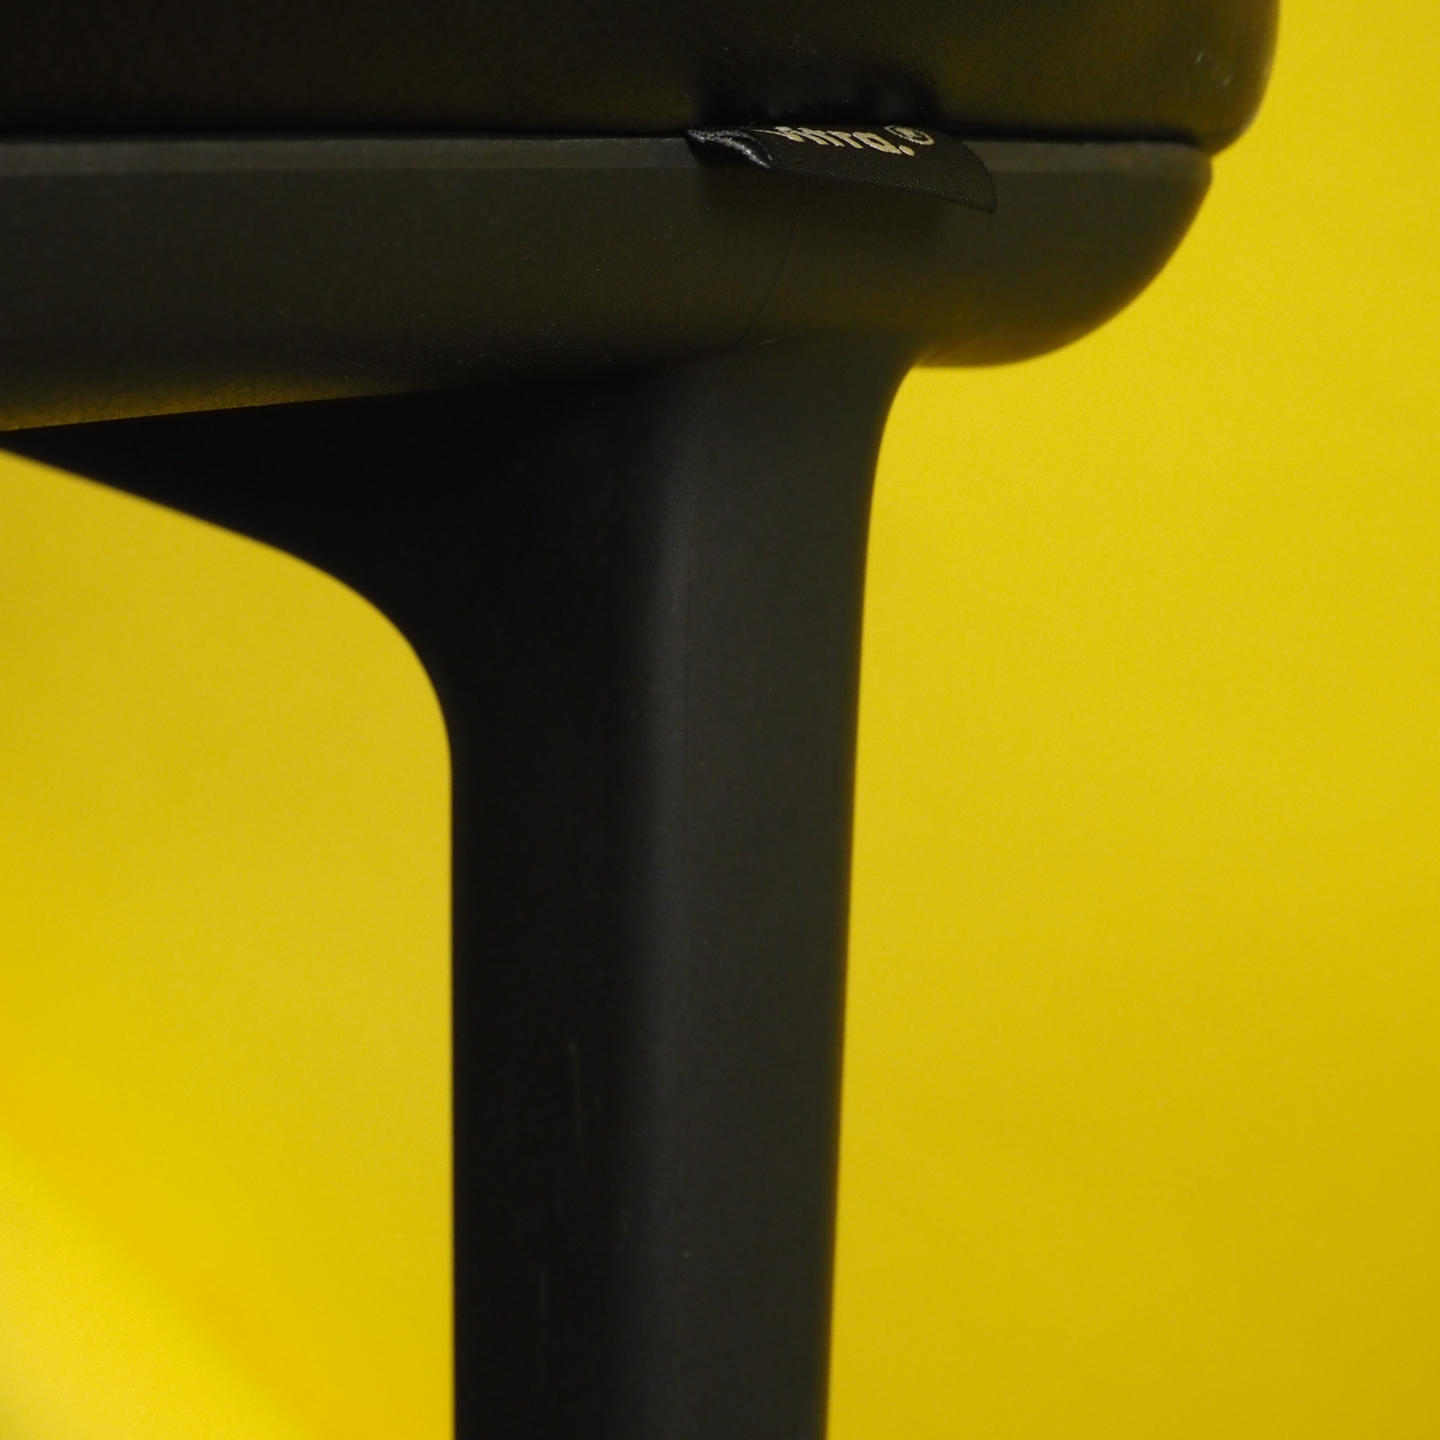 Armchair 'Softshell' in leather by Ronan &amp; Erwan Bouroullec for Vitra (ca. 2008) - Black